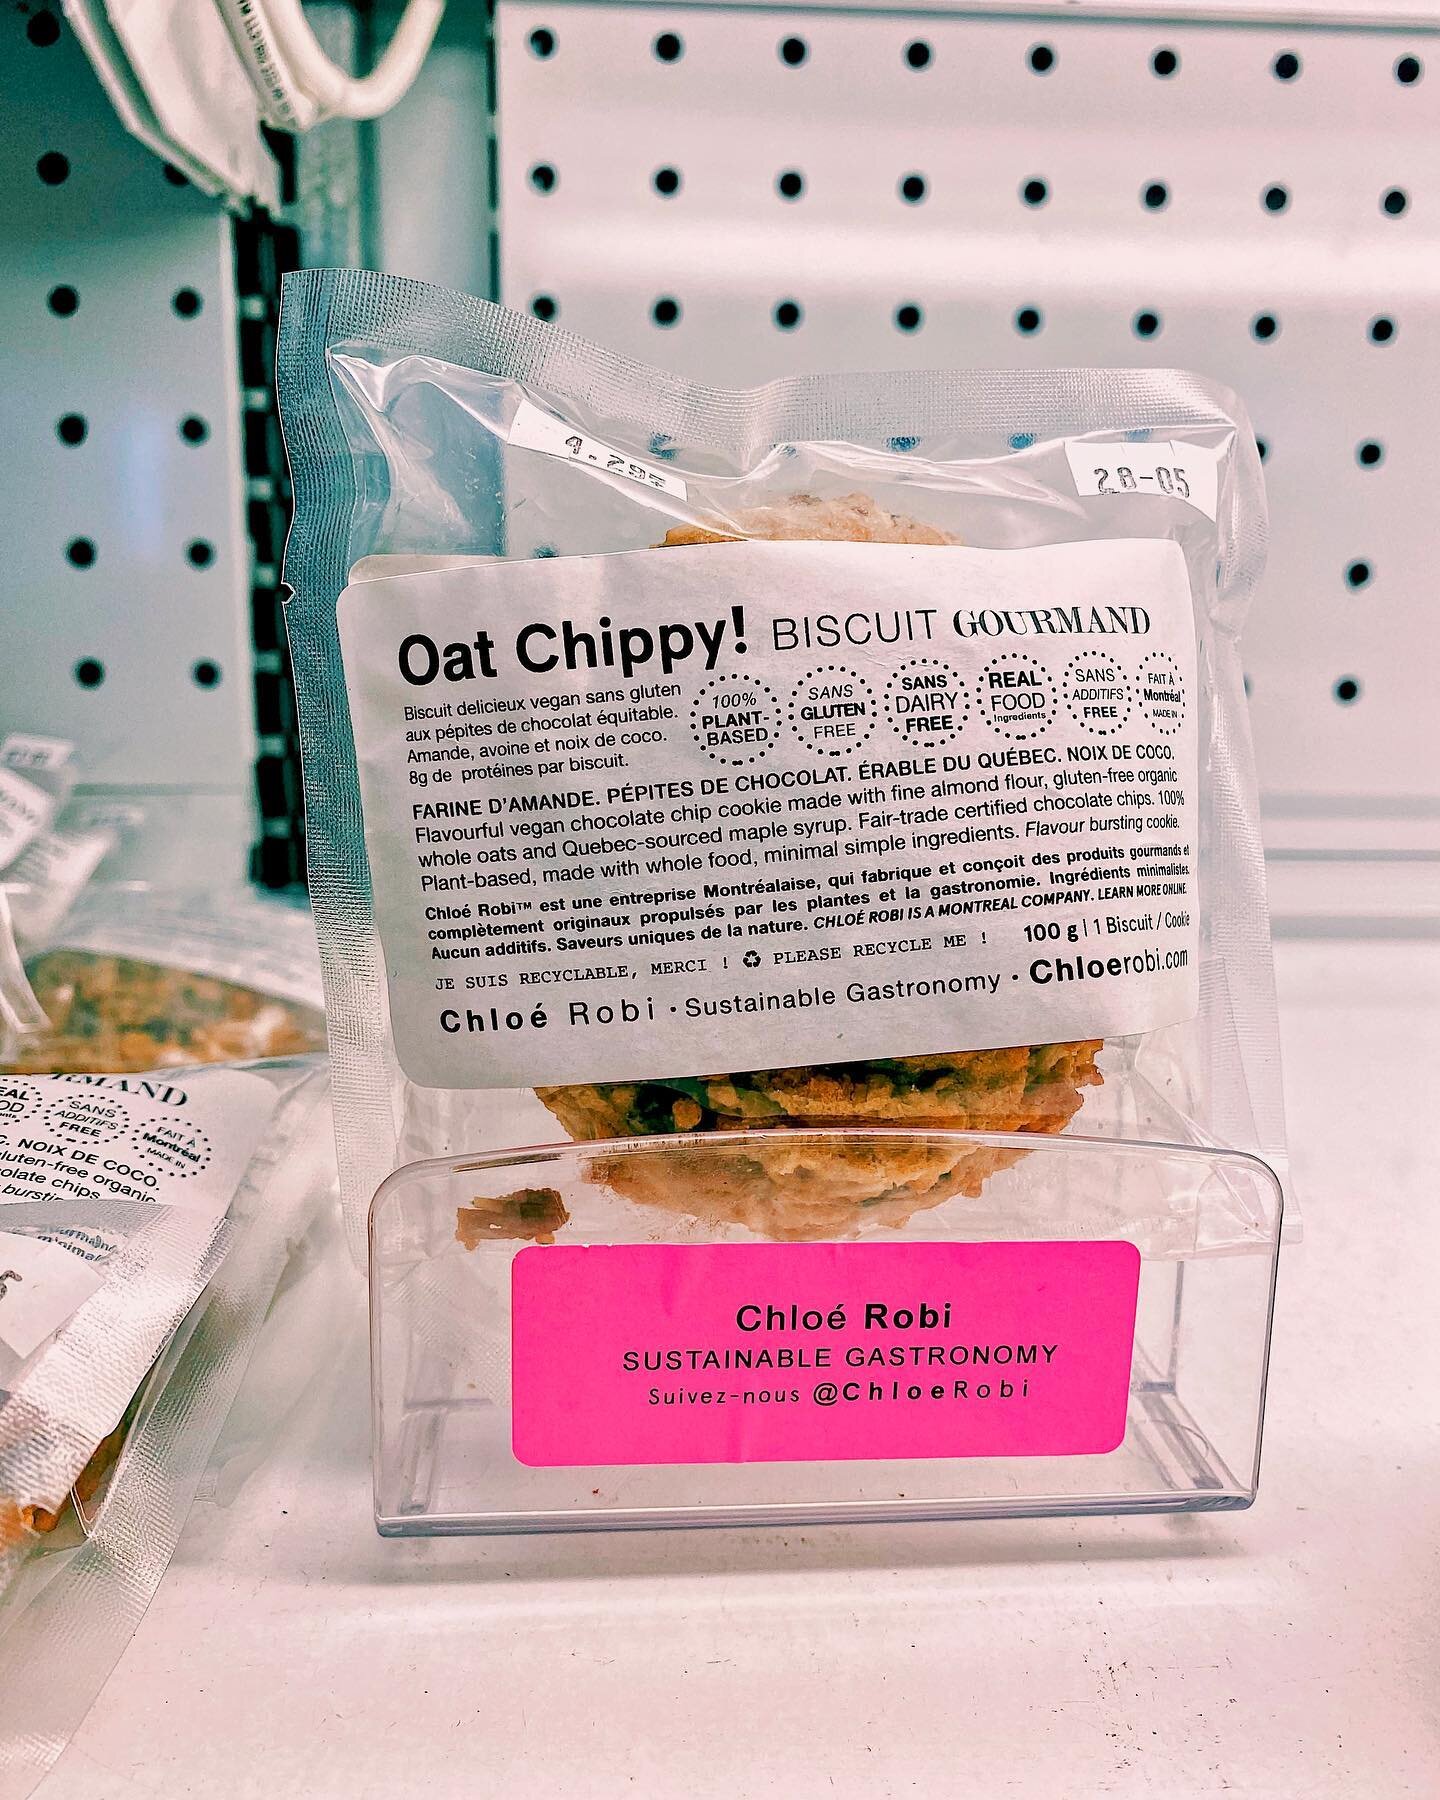 👄🍃 The Oat Chippy! @chloerobilab #Cookies 

Very proud that my cookies are 100% made from #PlantBased radically minimal ingredients #SustainableGastronomy and designed for flavourful performance &amp; are gluten-free and woman-owned + operated. 

T